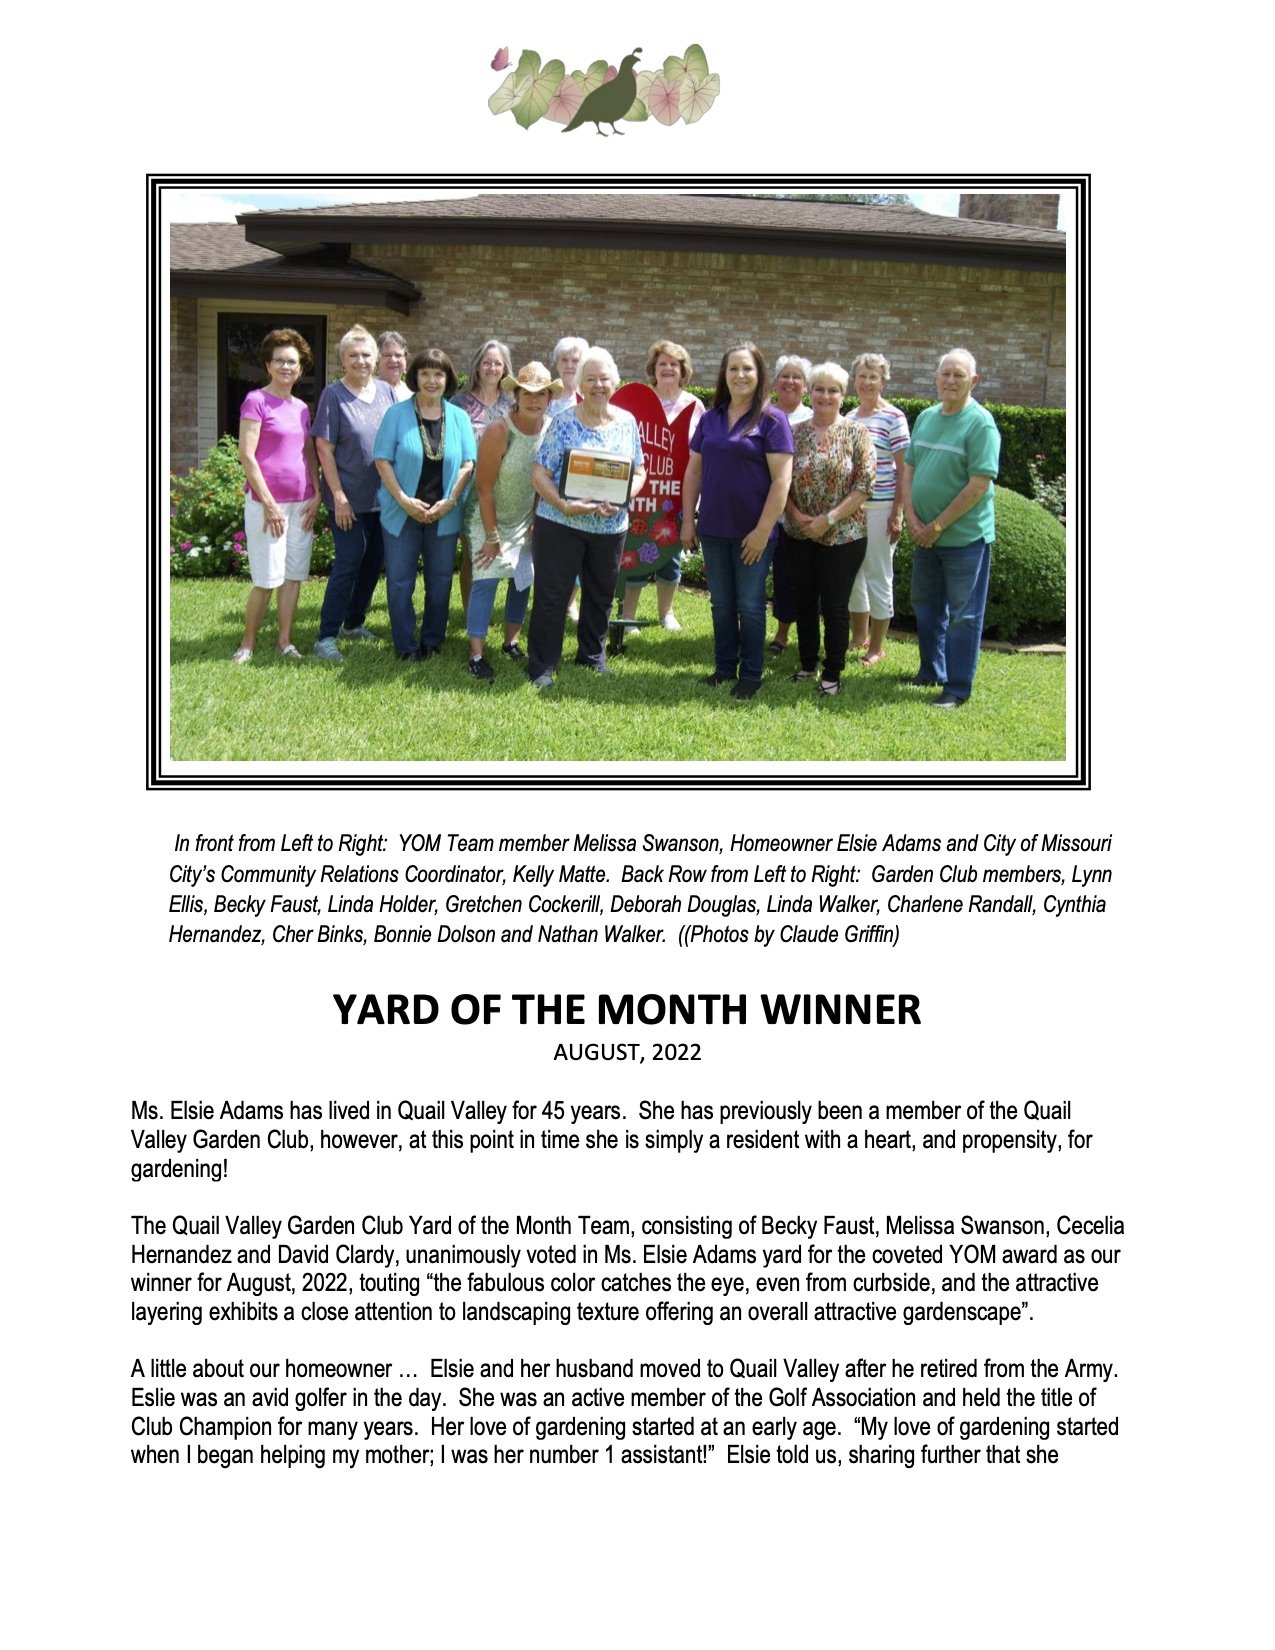 QVGC Press Announcement - Yard of the Month - August, 2022.jpg